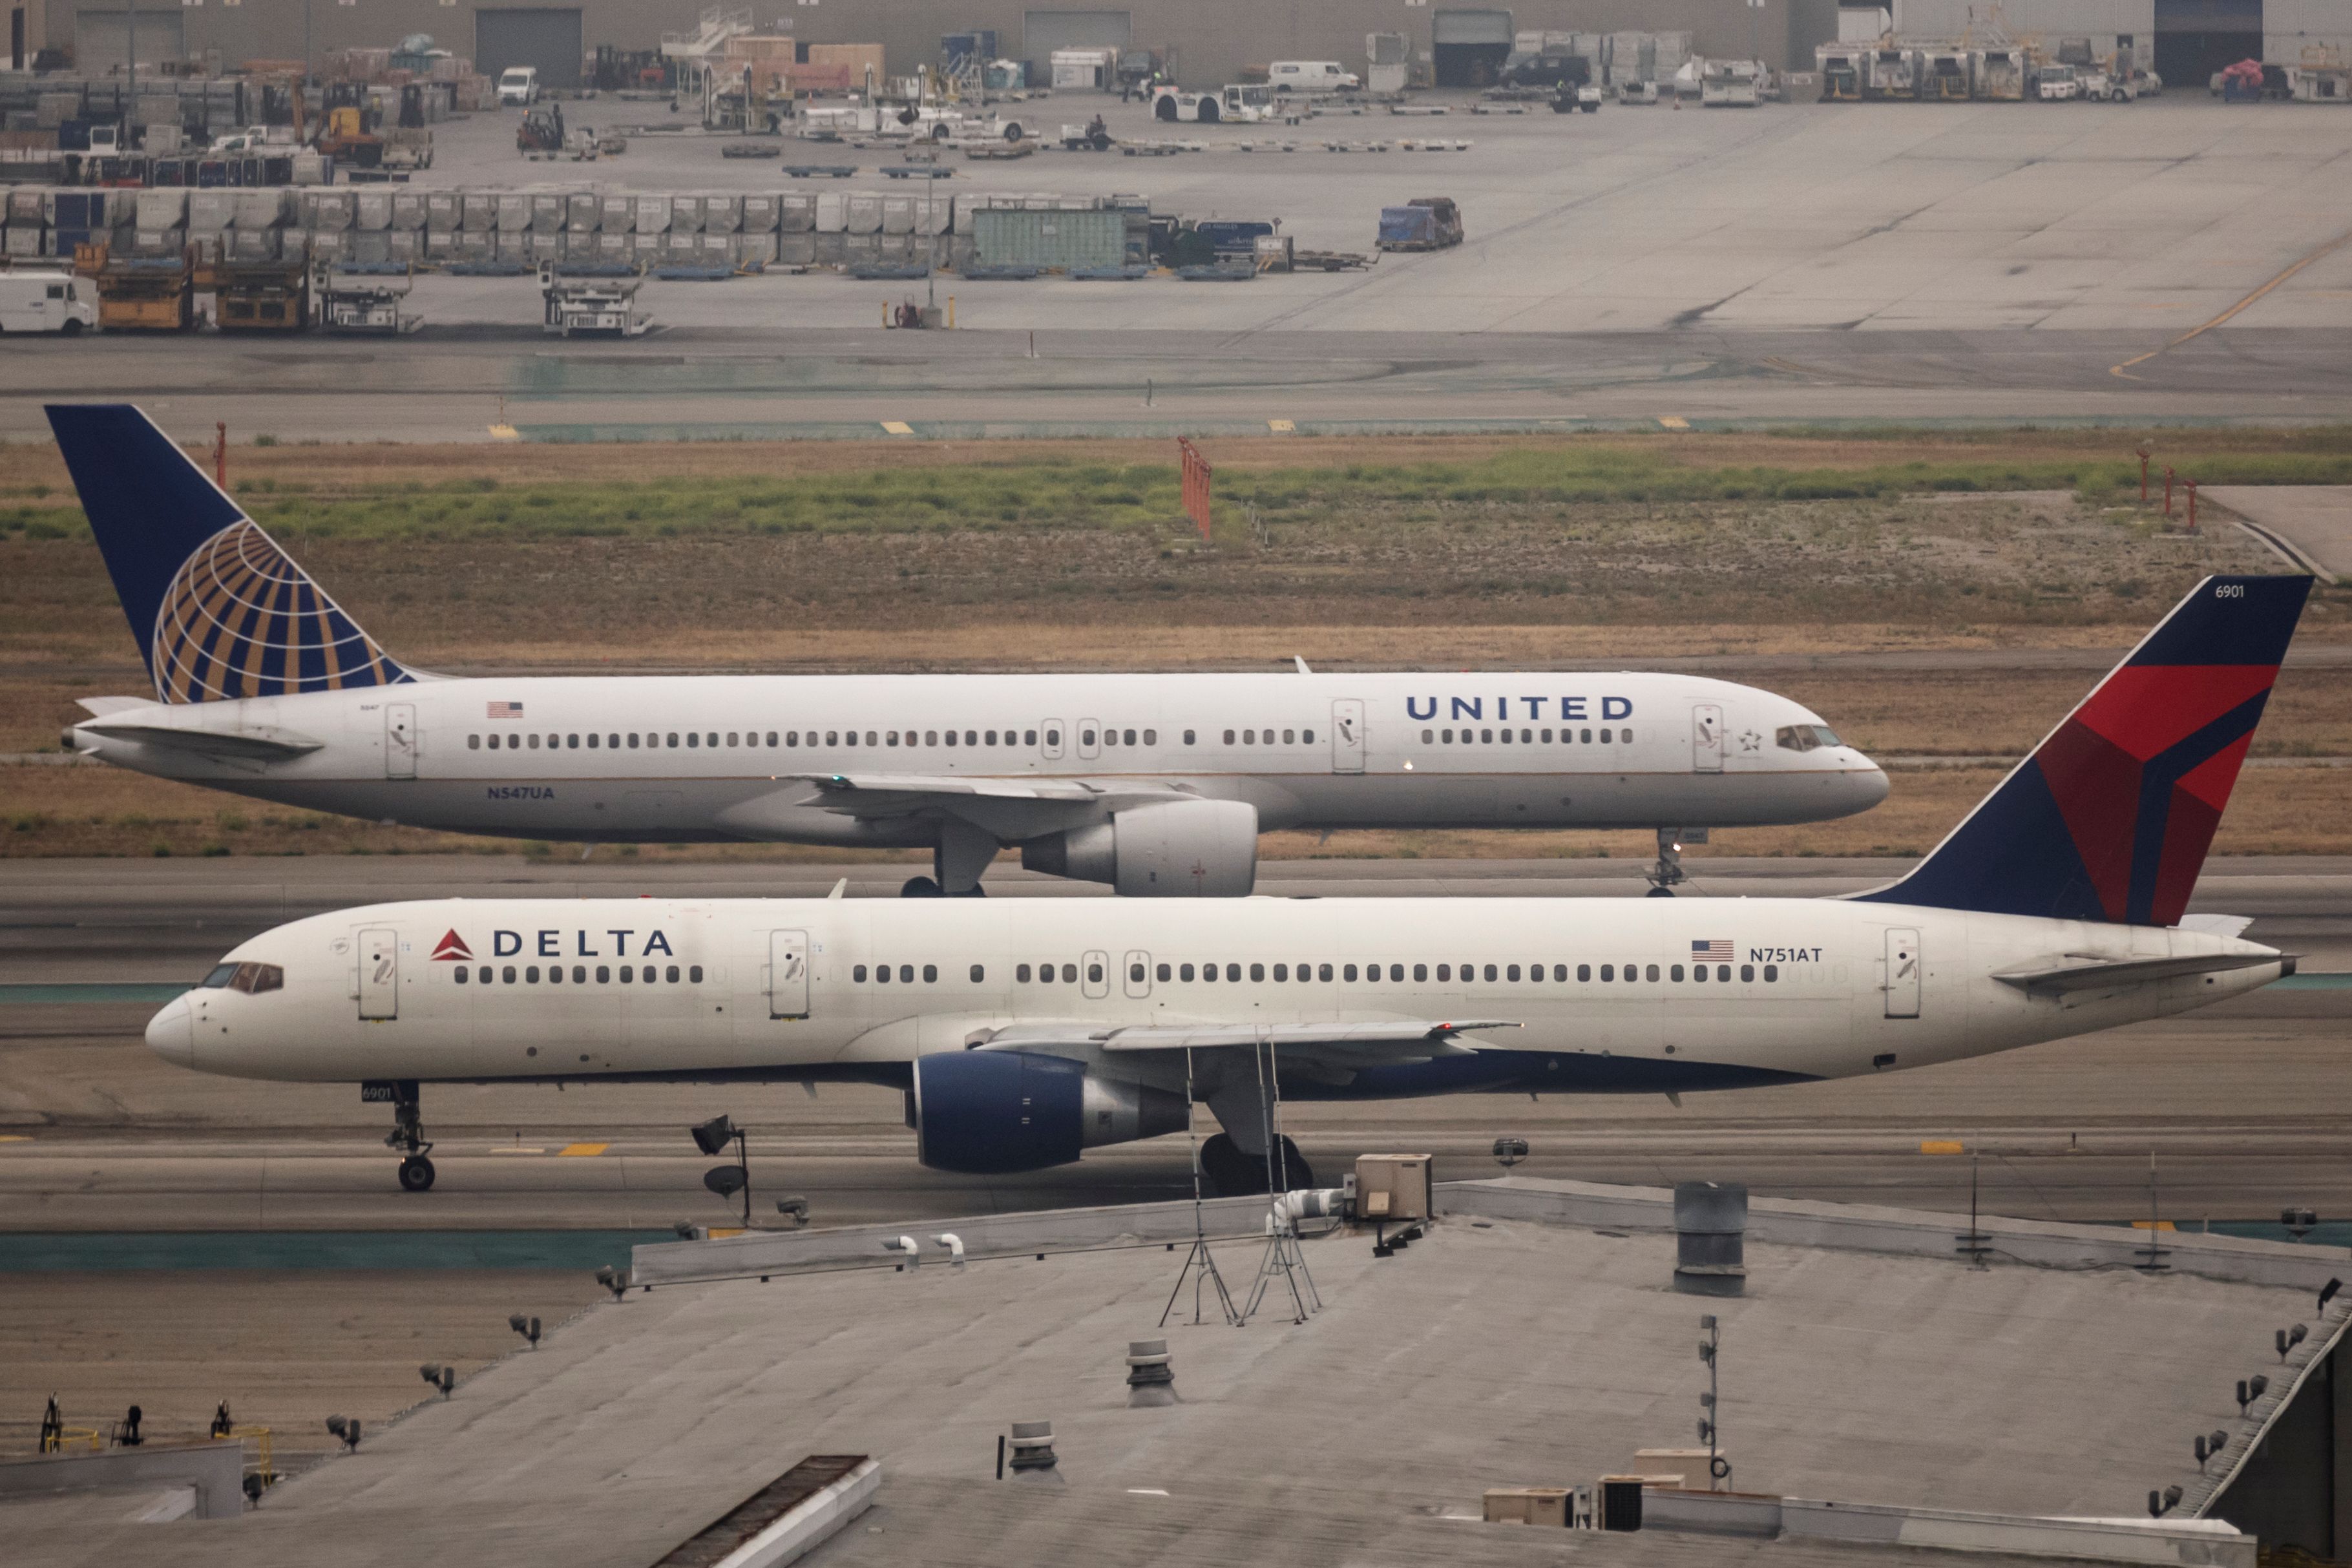 Boeing 757s of United and Delta Air Lines at LAX